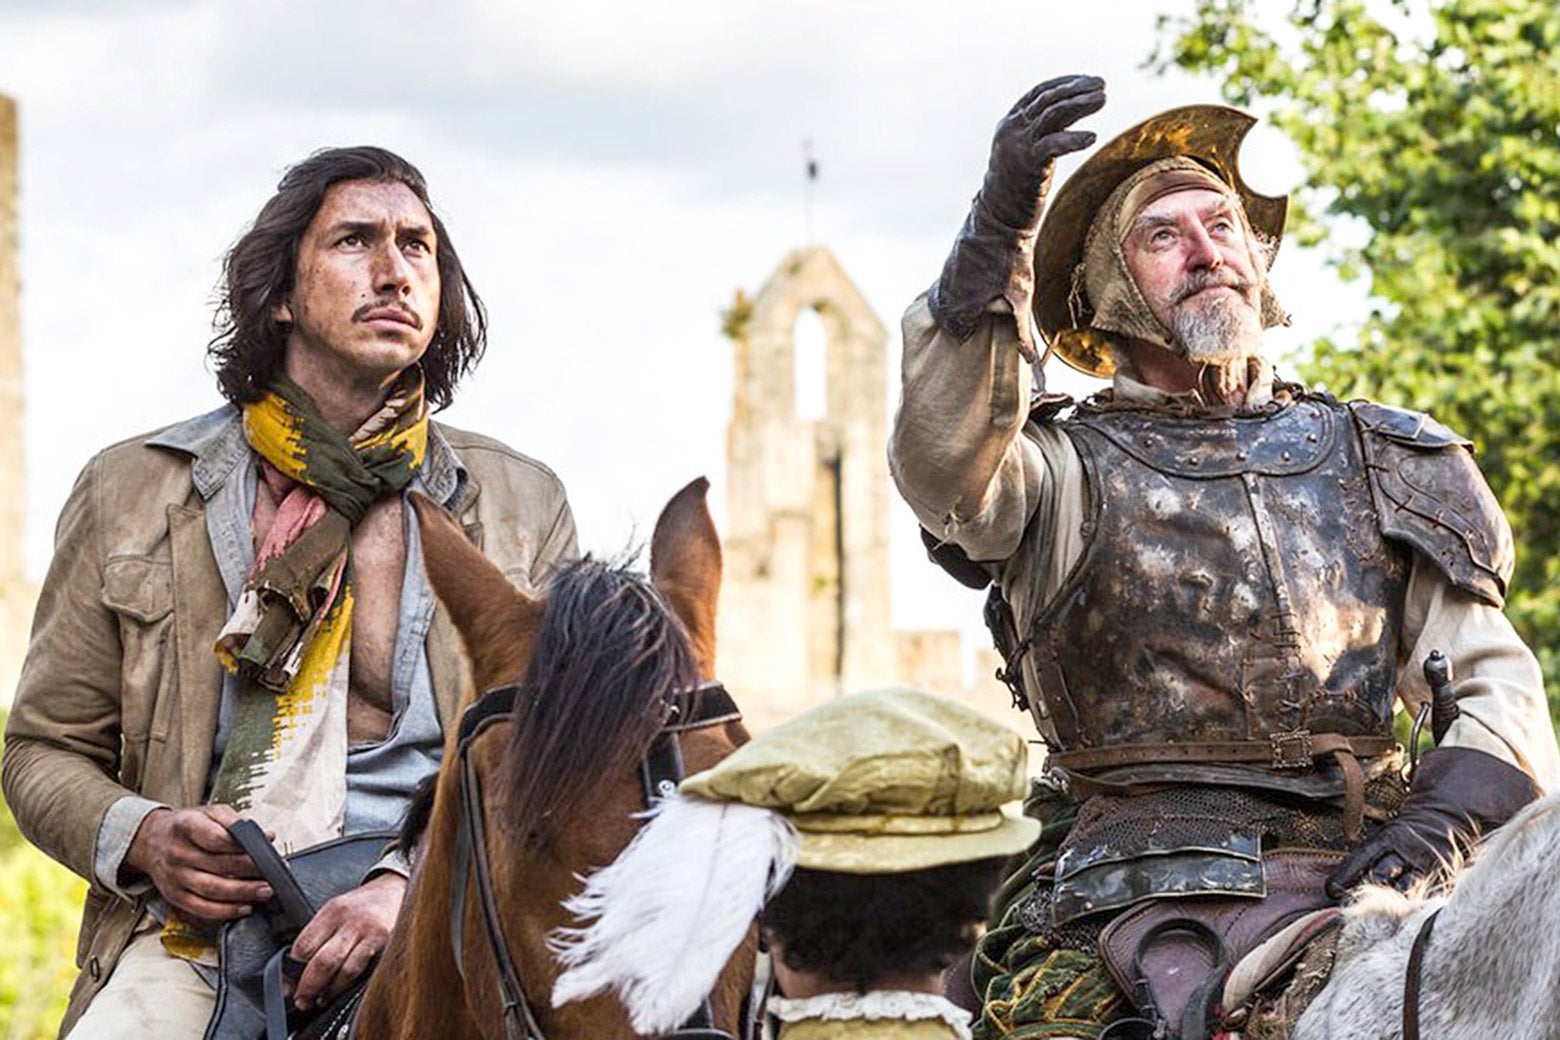 Adam Driver and Jonathan Pryce, on horseback, in The Man Who Killed Don Quixote. 